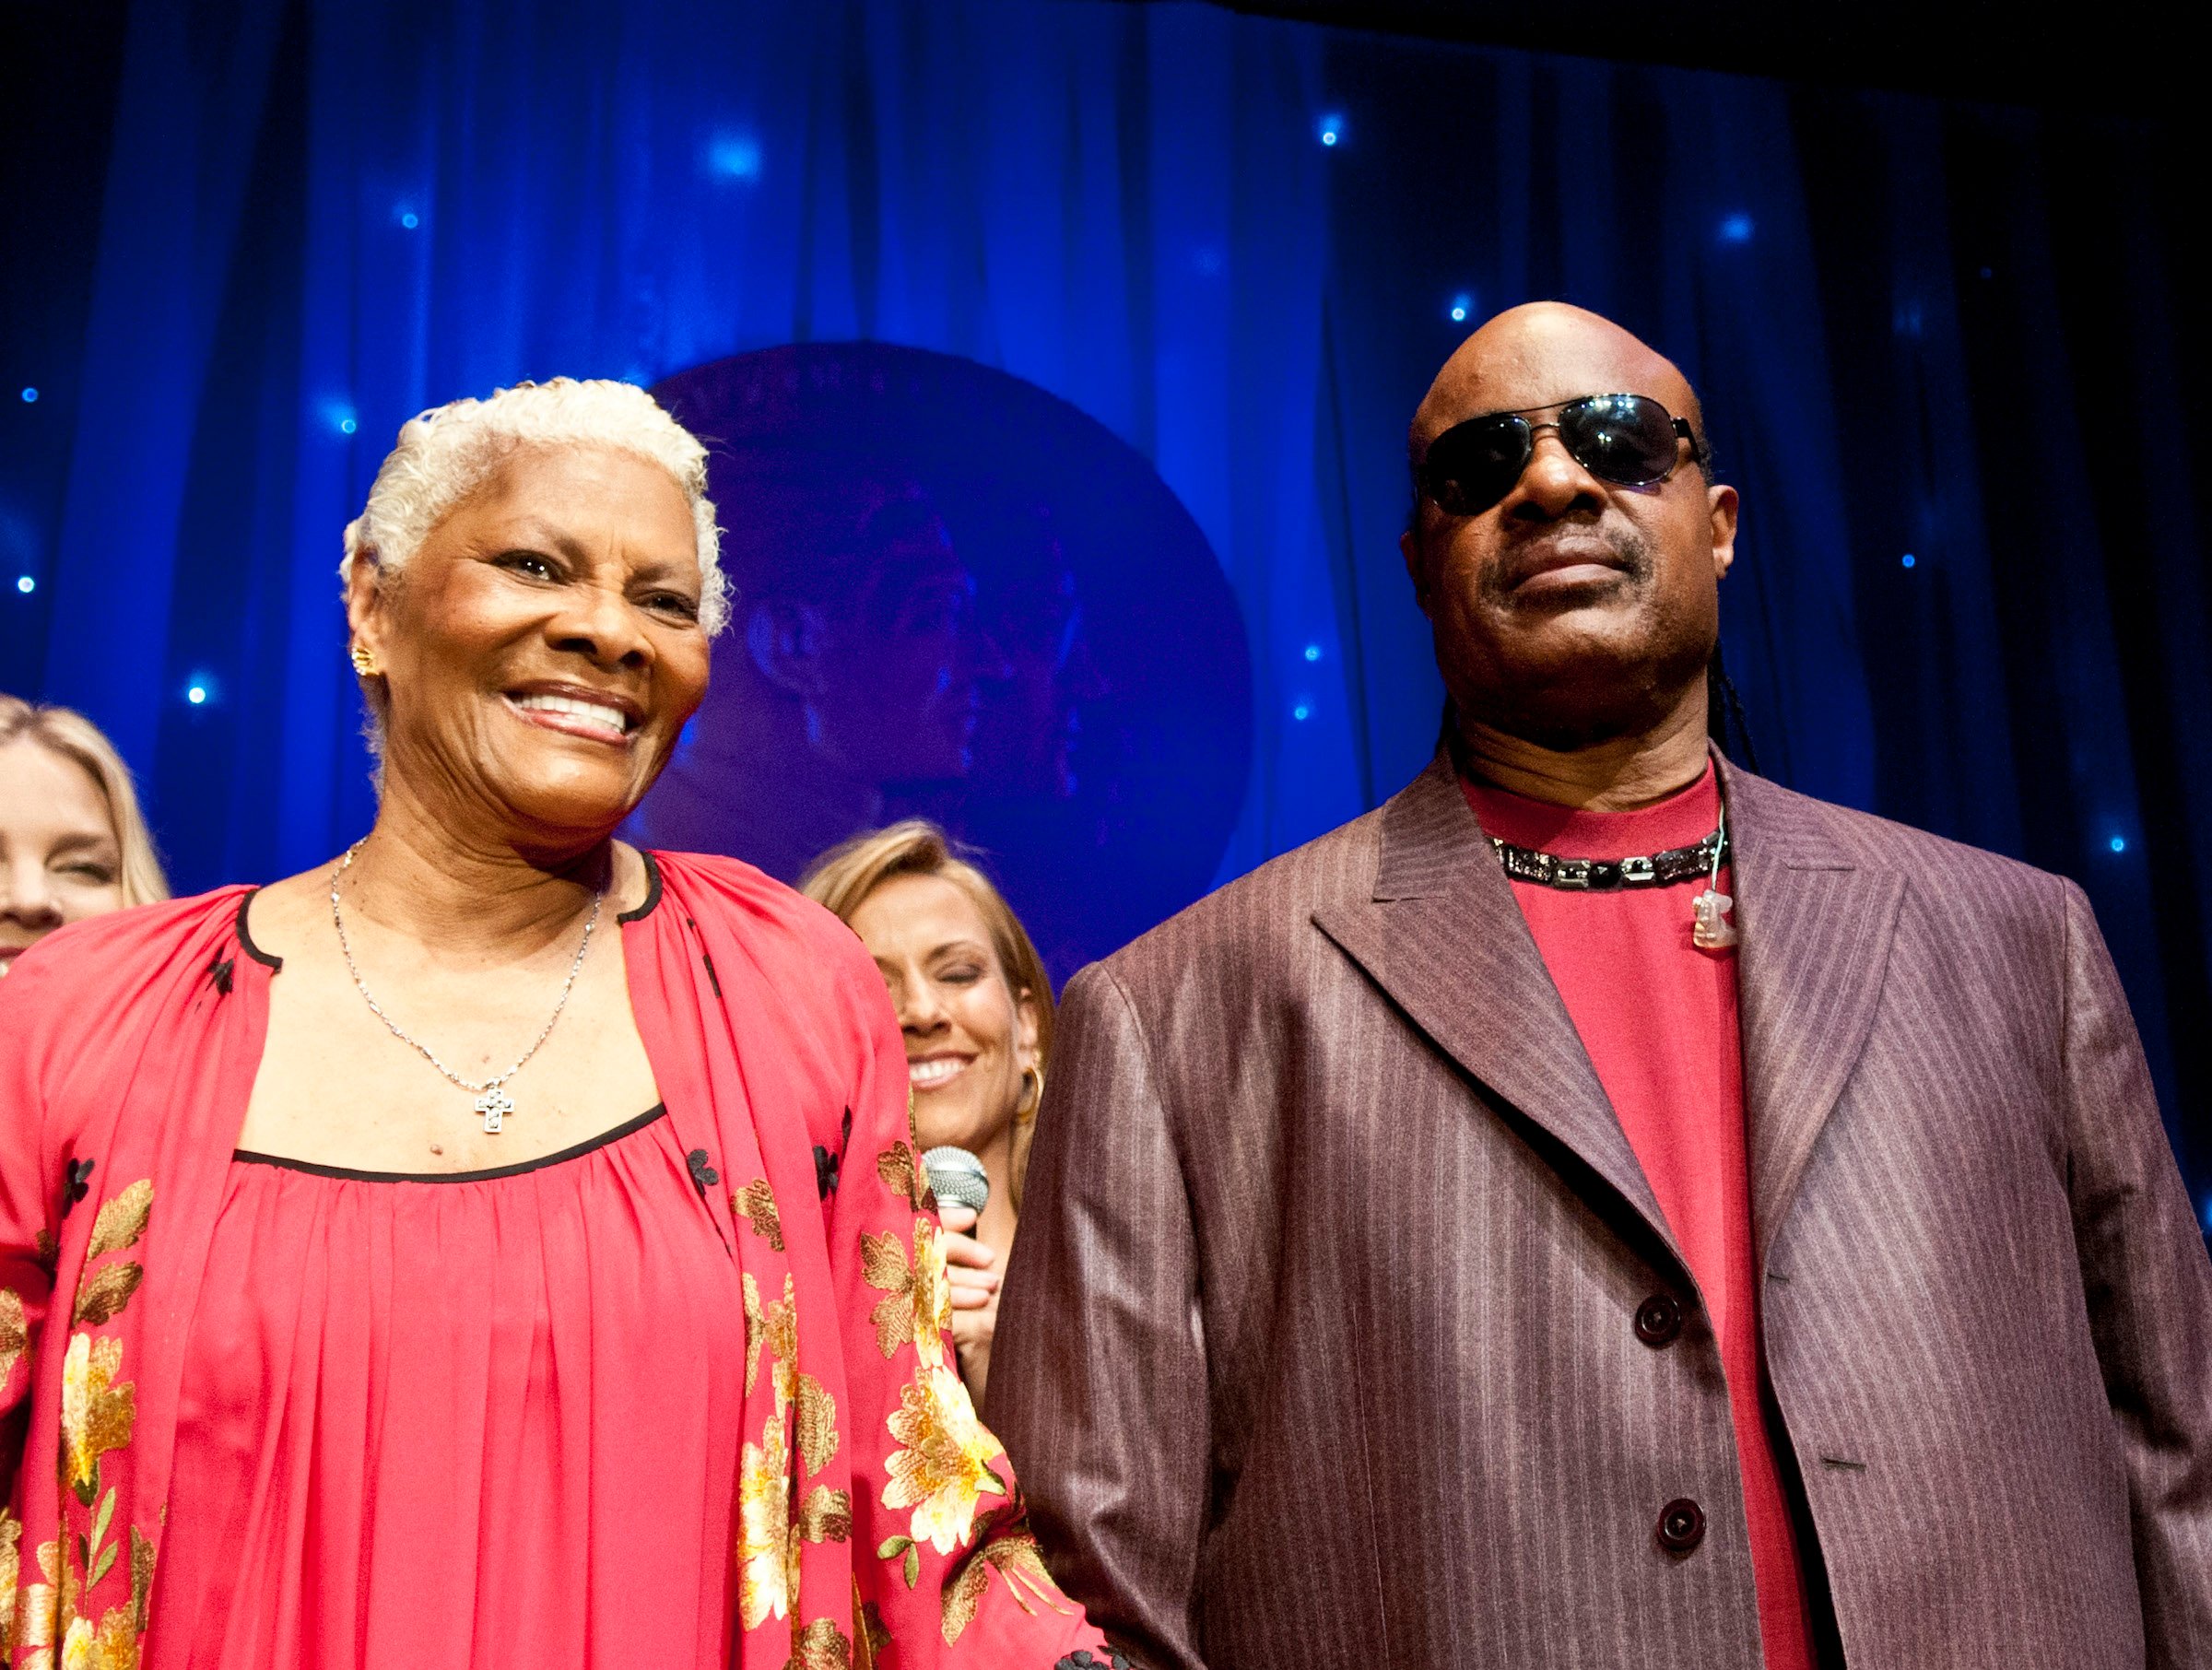 Dionne Warwick and Stevie Wonder standing next to each other